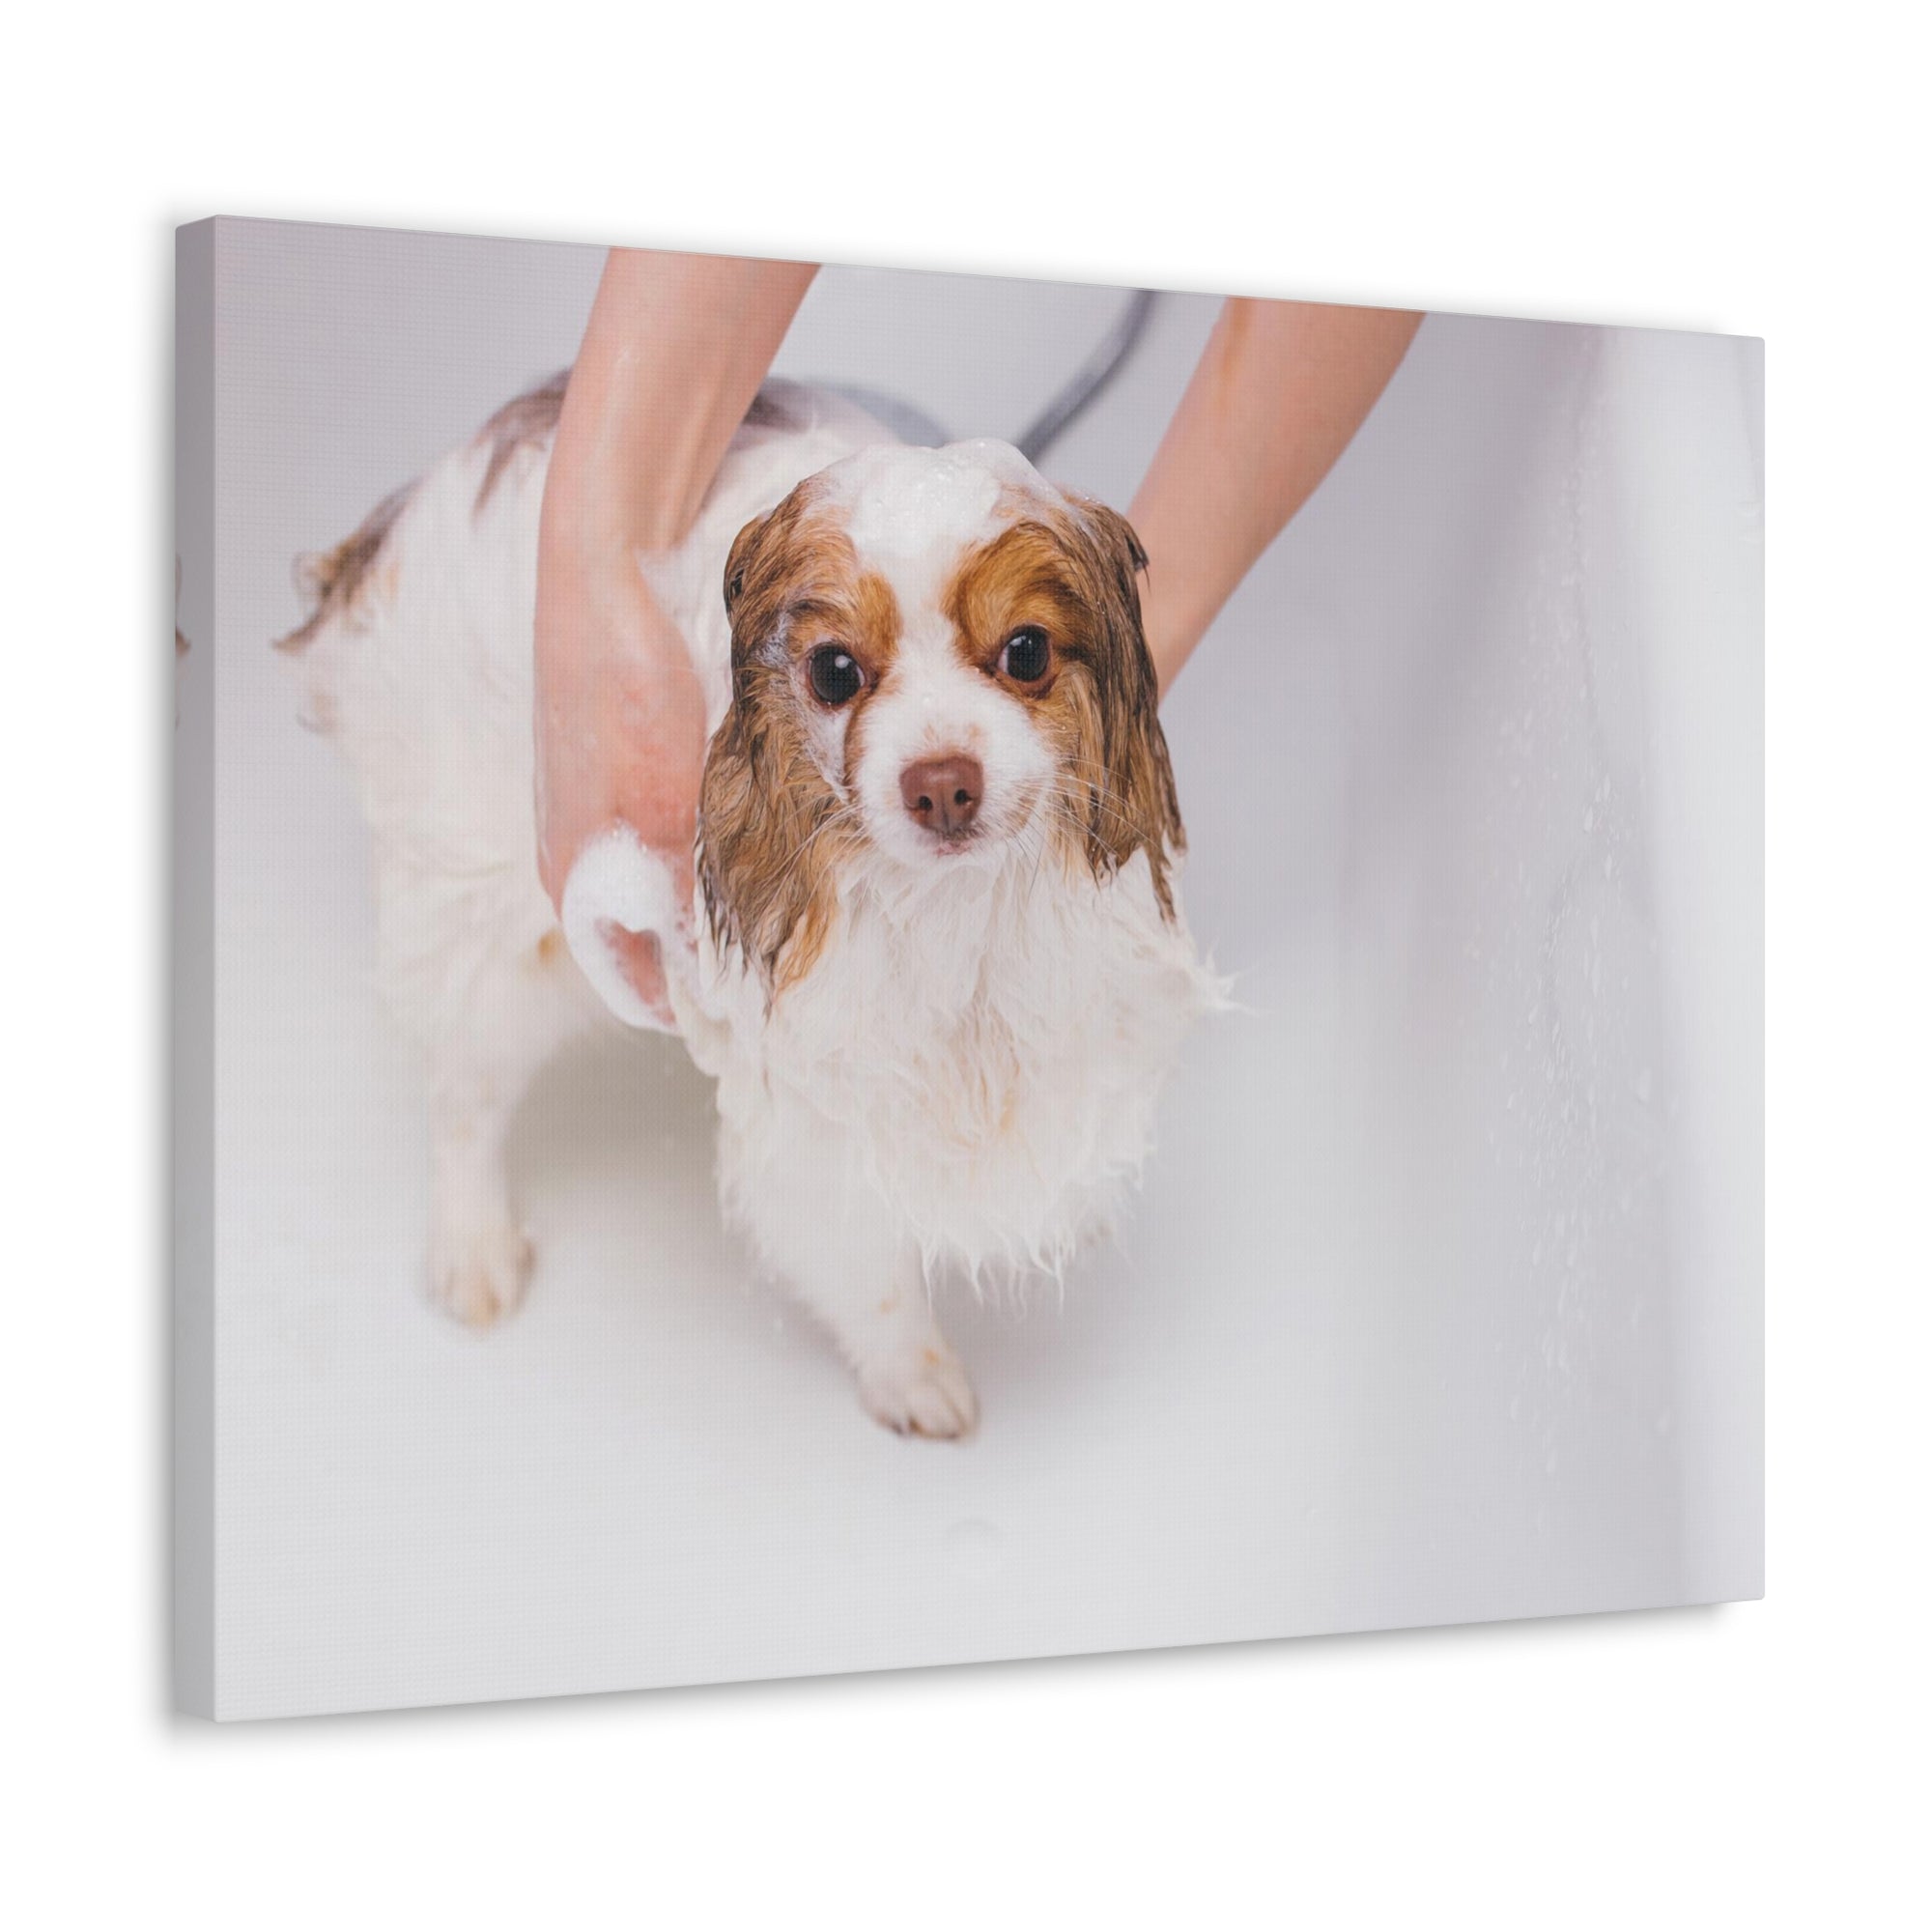 Cute Cavalier King Charles Spaniel Bath Canvas Wall Art for Home Decor Ready-to-Hang-Express Your Love Gifts